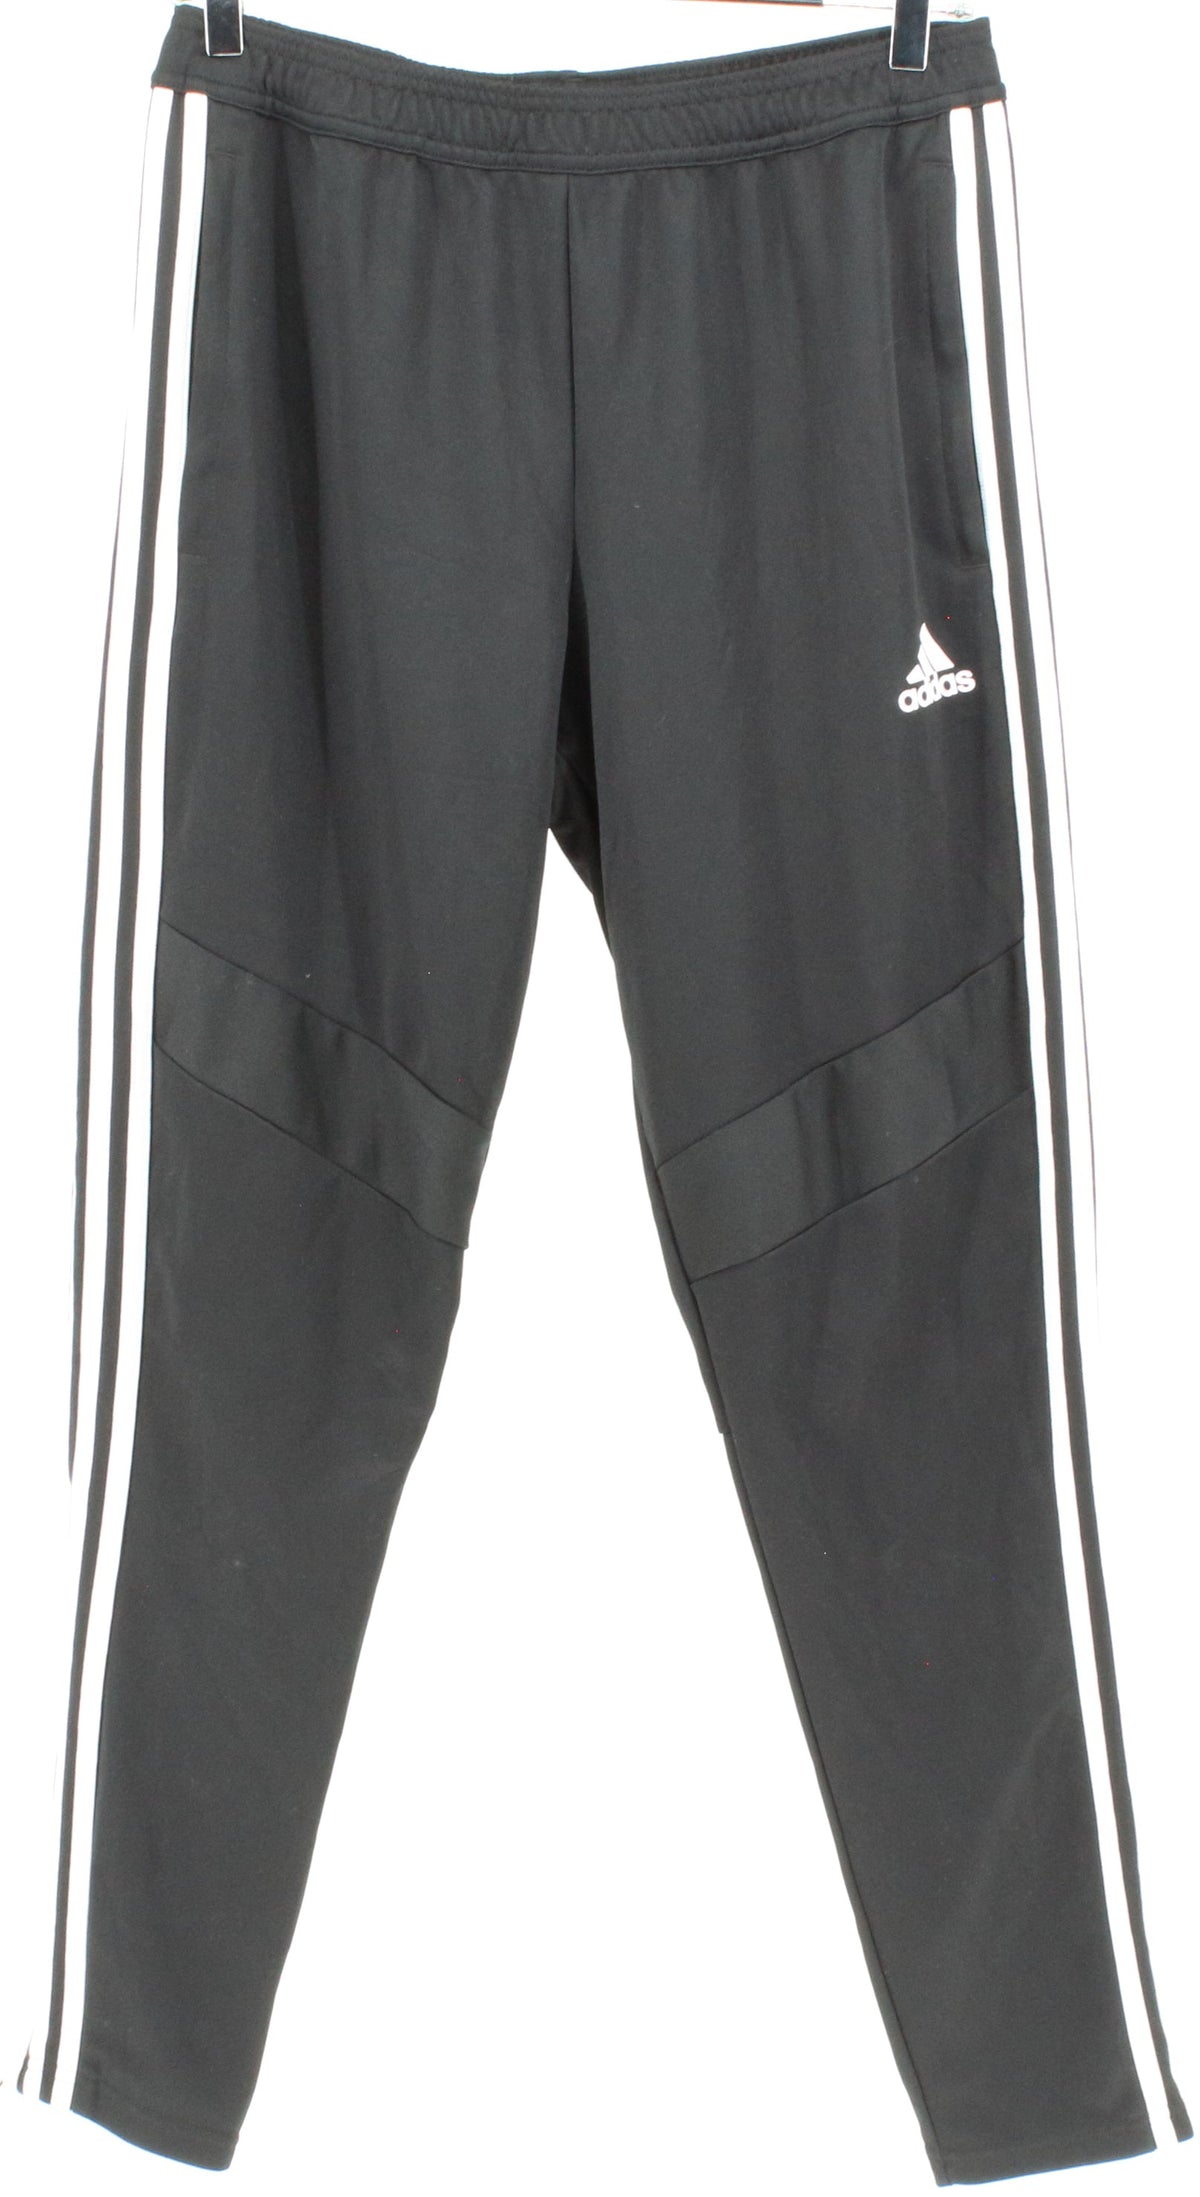 Adidas Climacool 11 Black and White Men's Pants